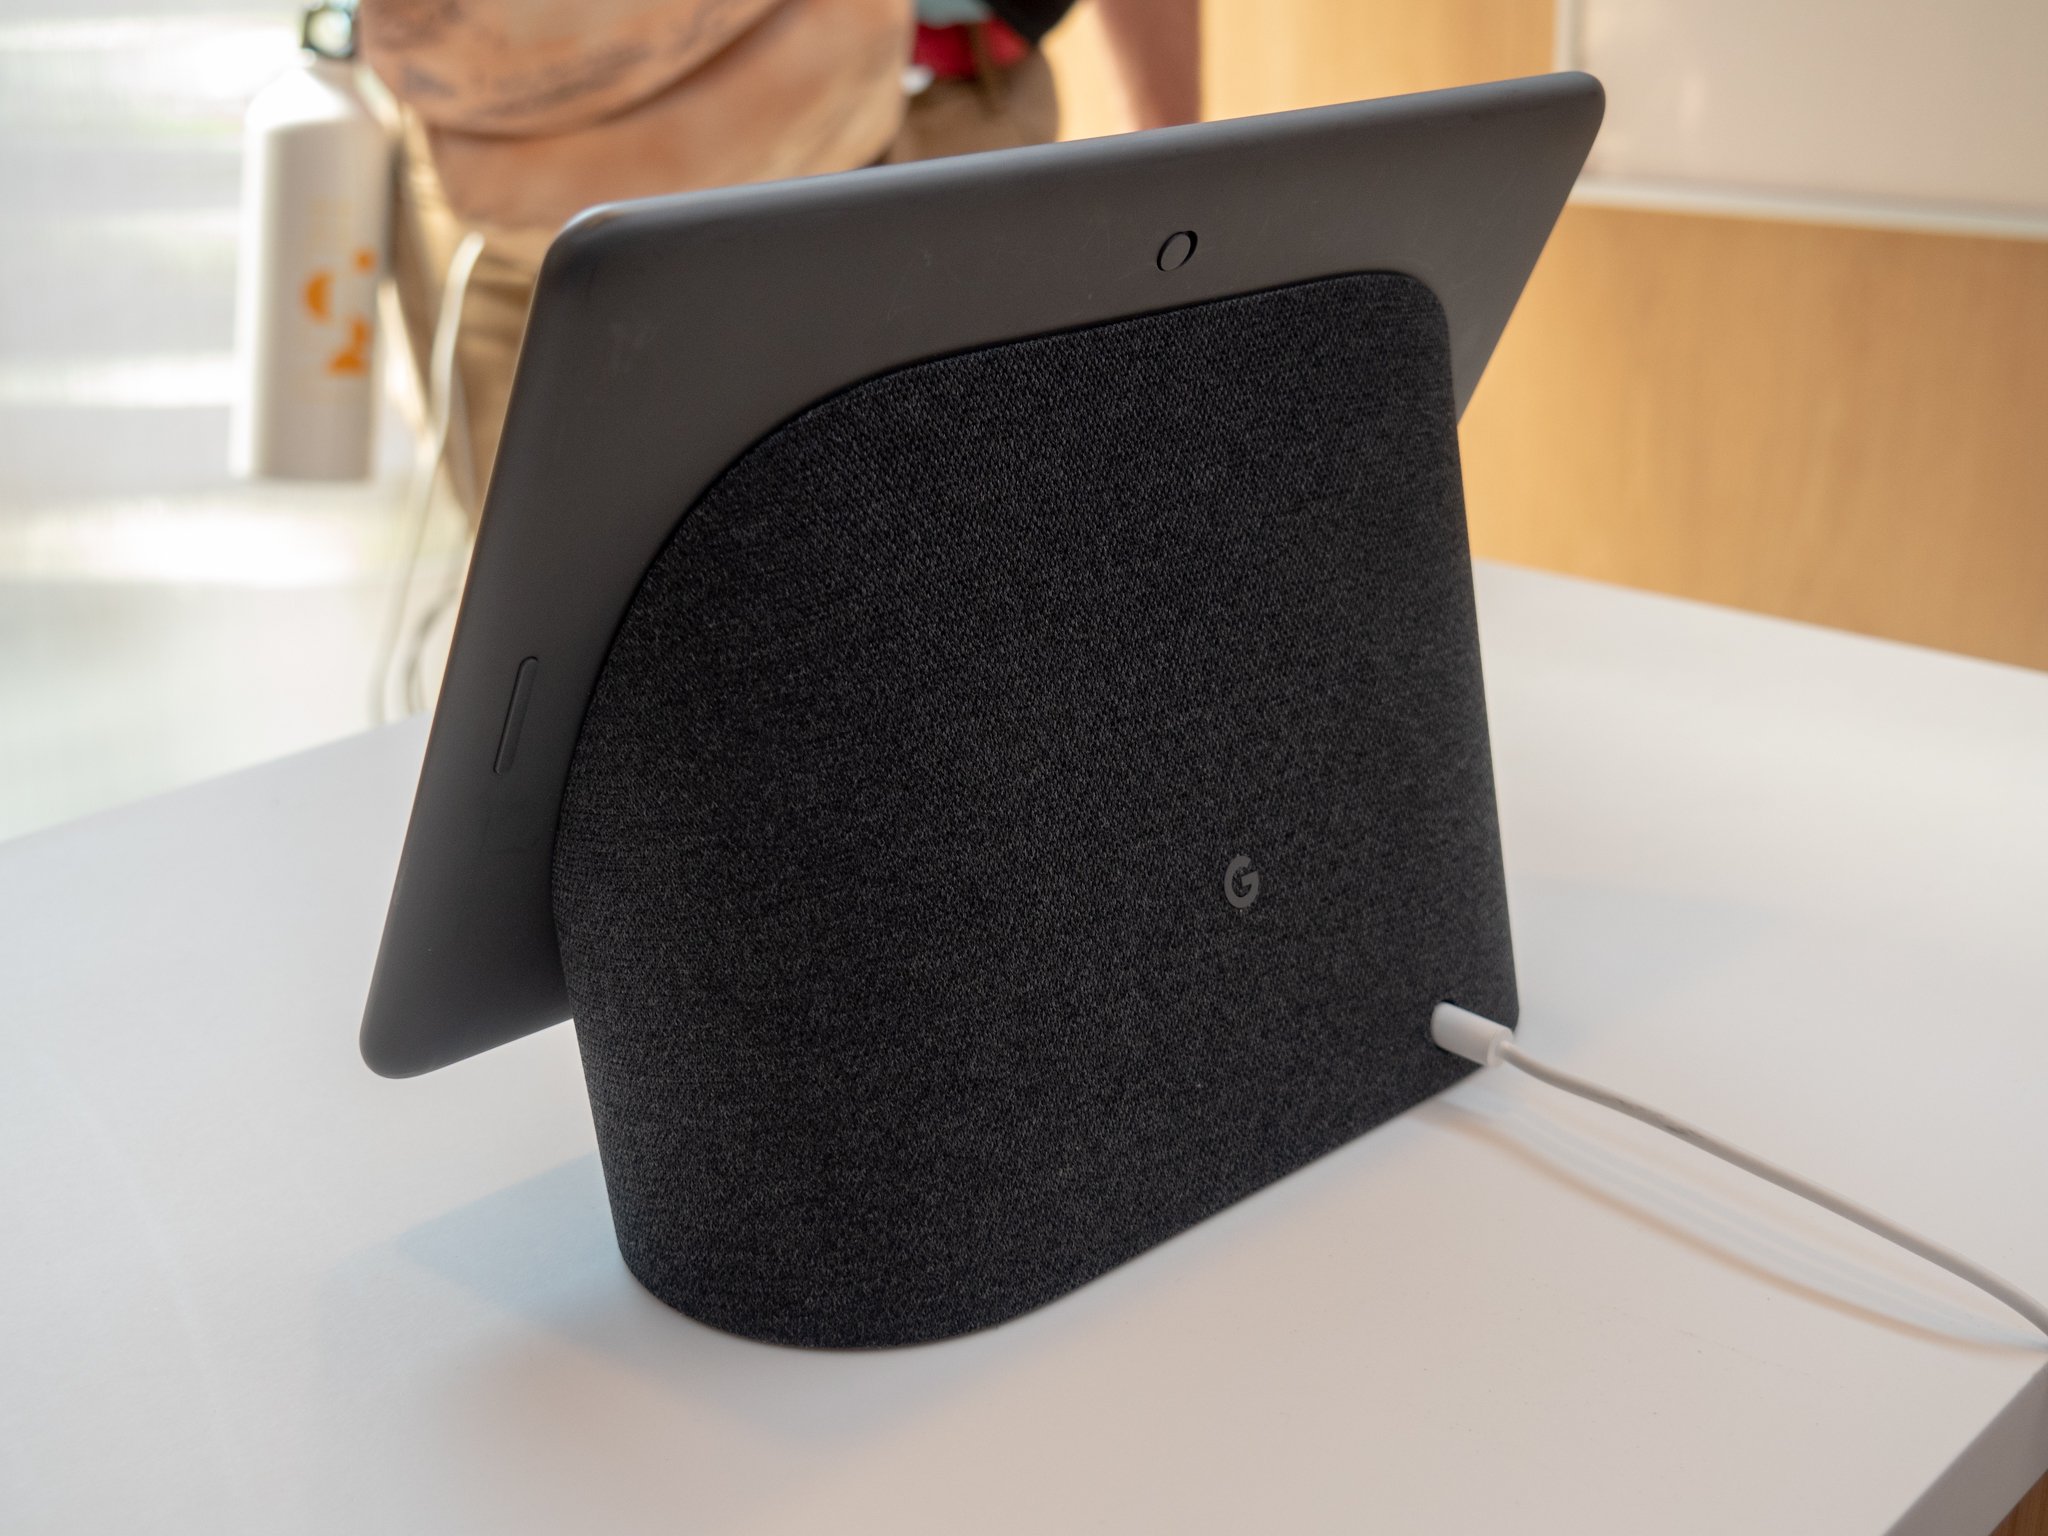 Google Nest Hub Max hands-on: A great all-in-one for your smart home ...